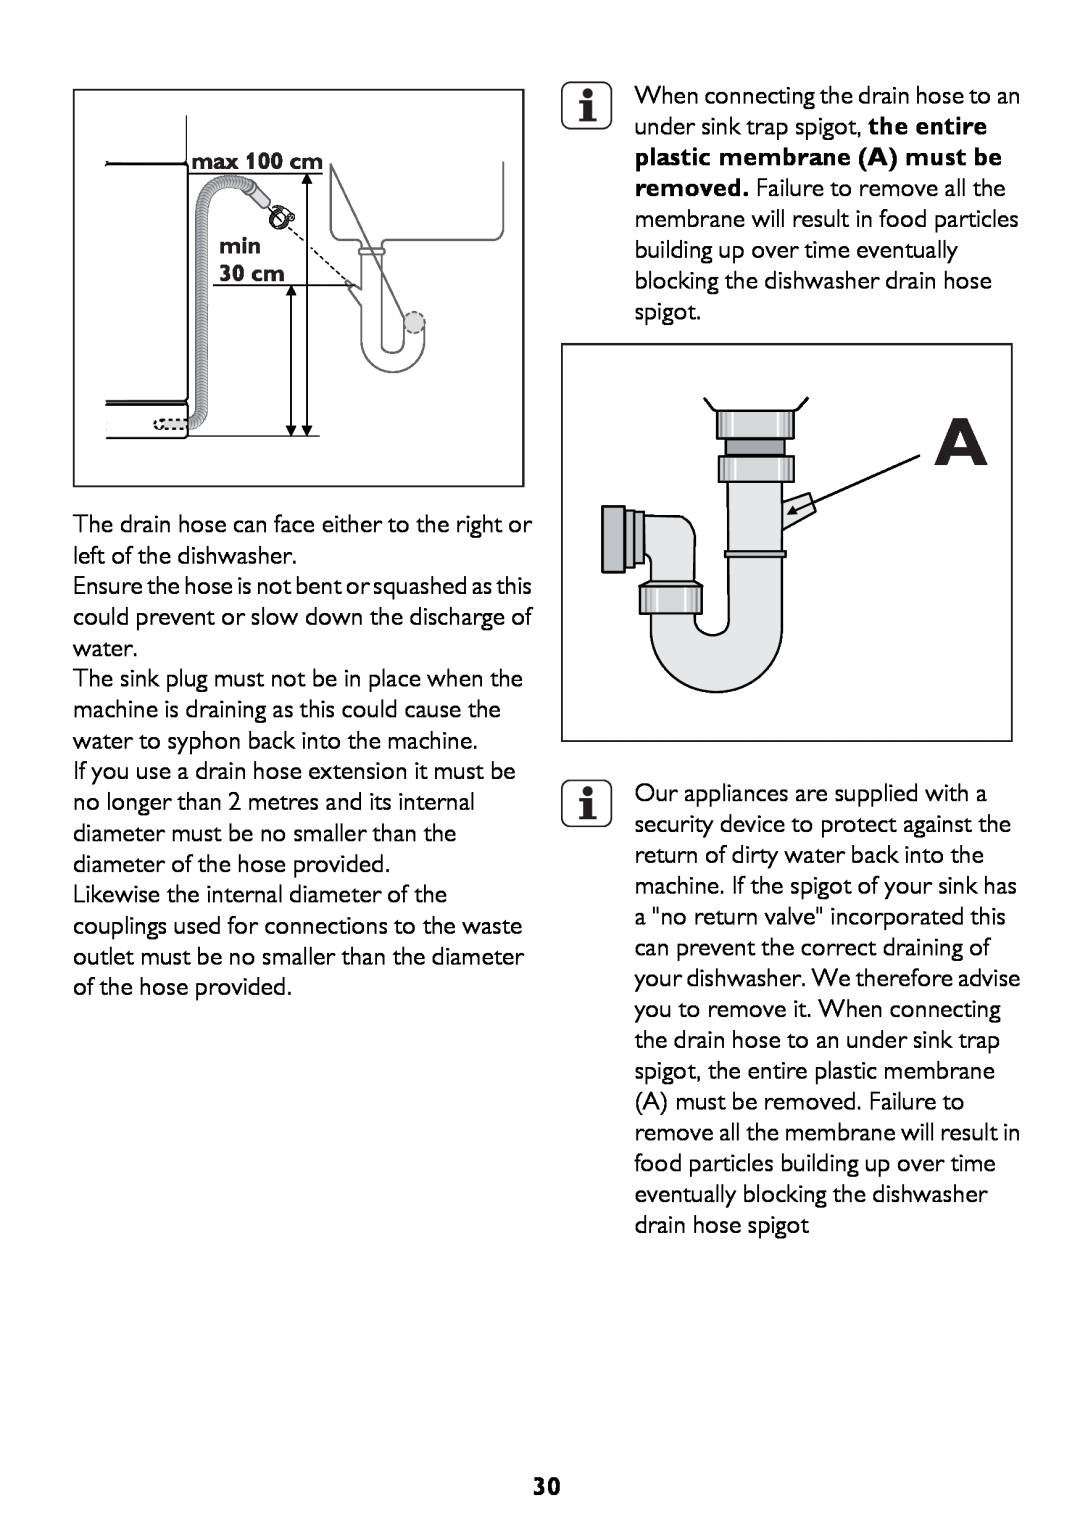 John Lewis JLDWW 1206 instruction manual The drain hose can face either to the right or left of the dishwasher 